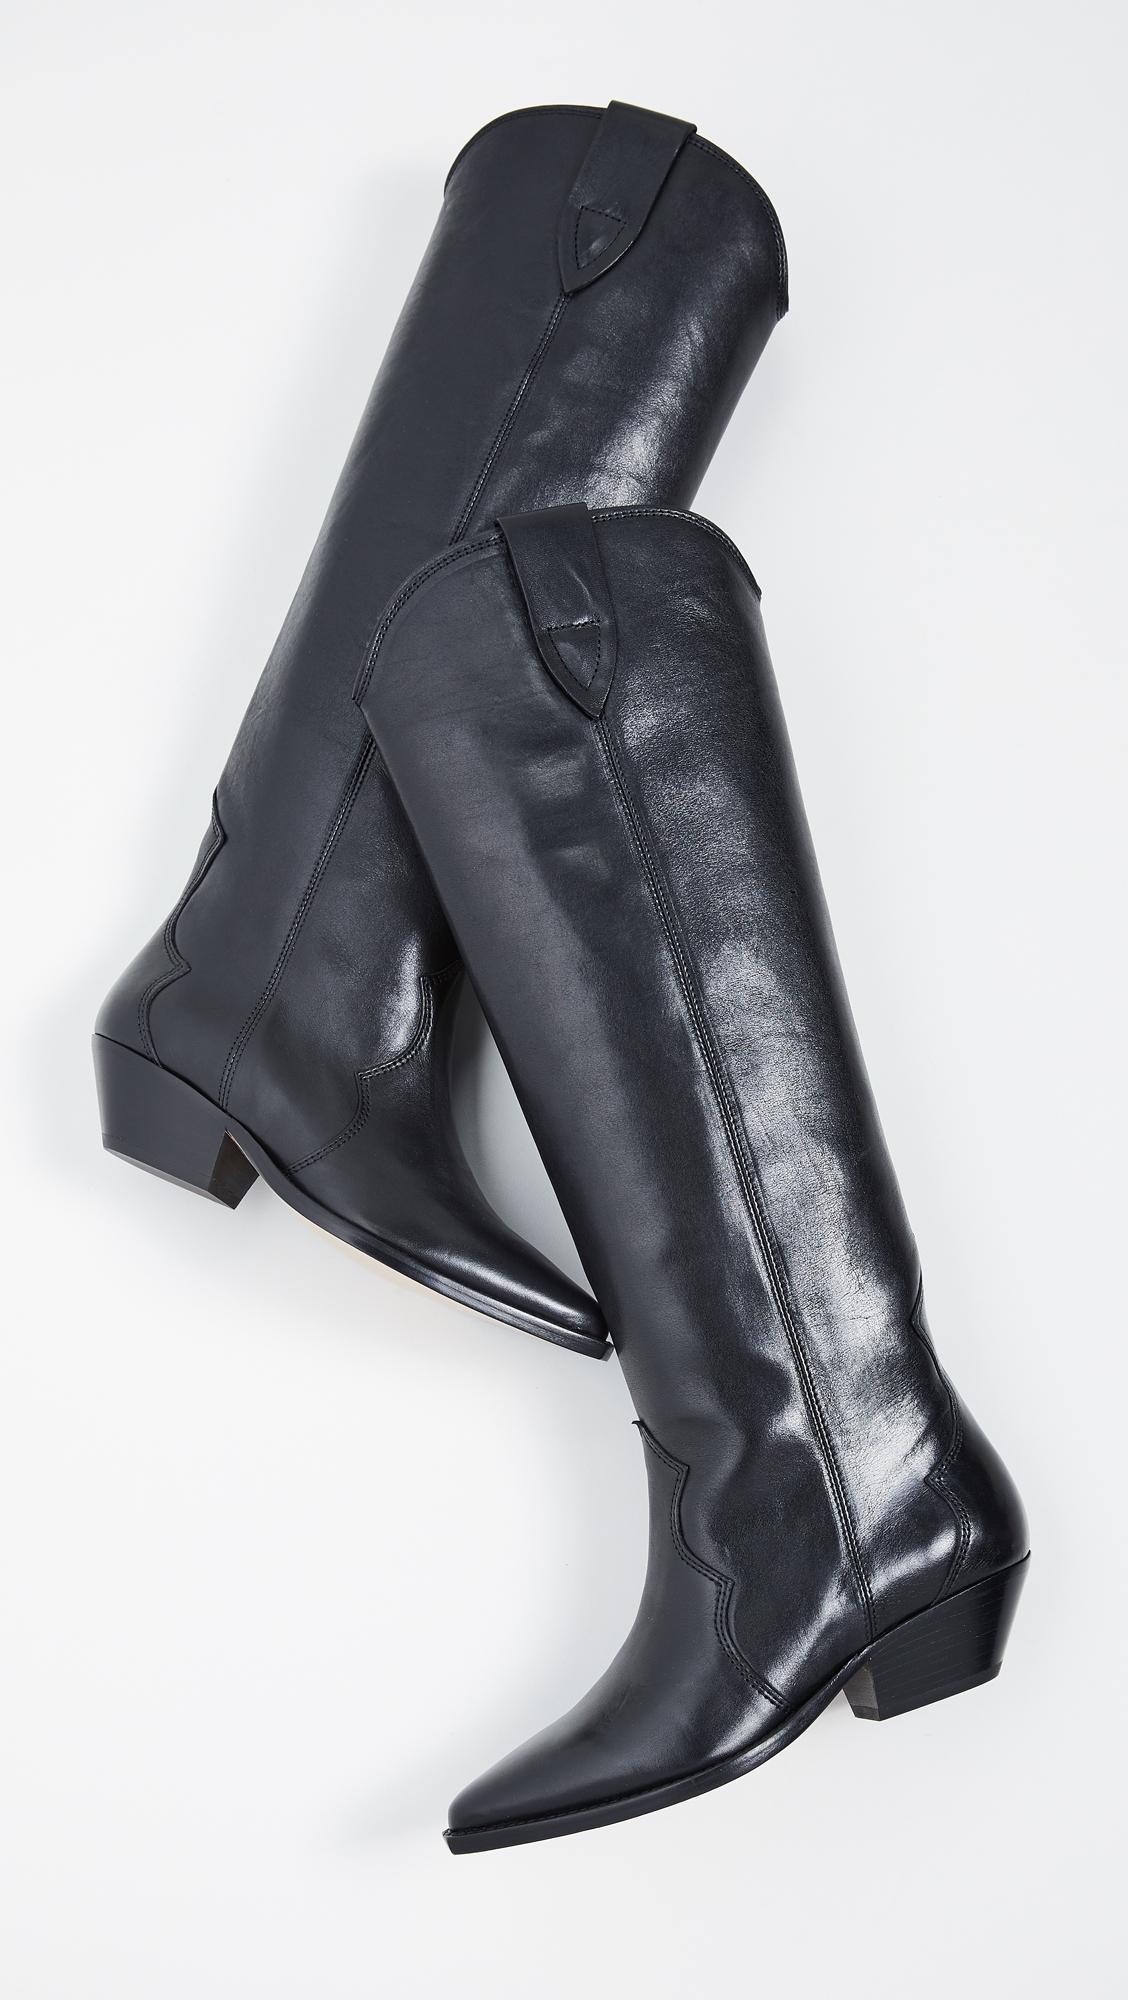 Isabel Marant Leather Denvee Tall Boots in Black - Lyst